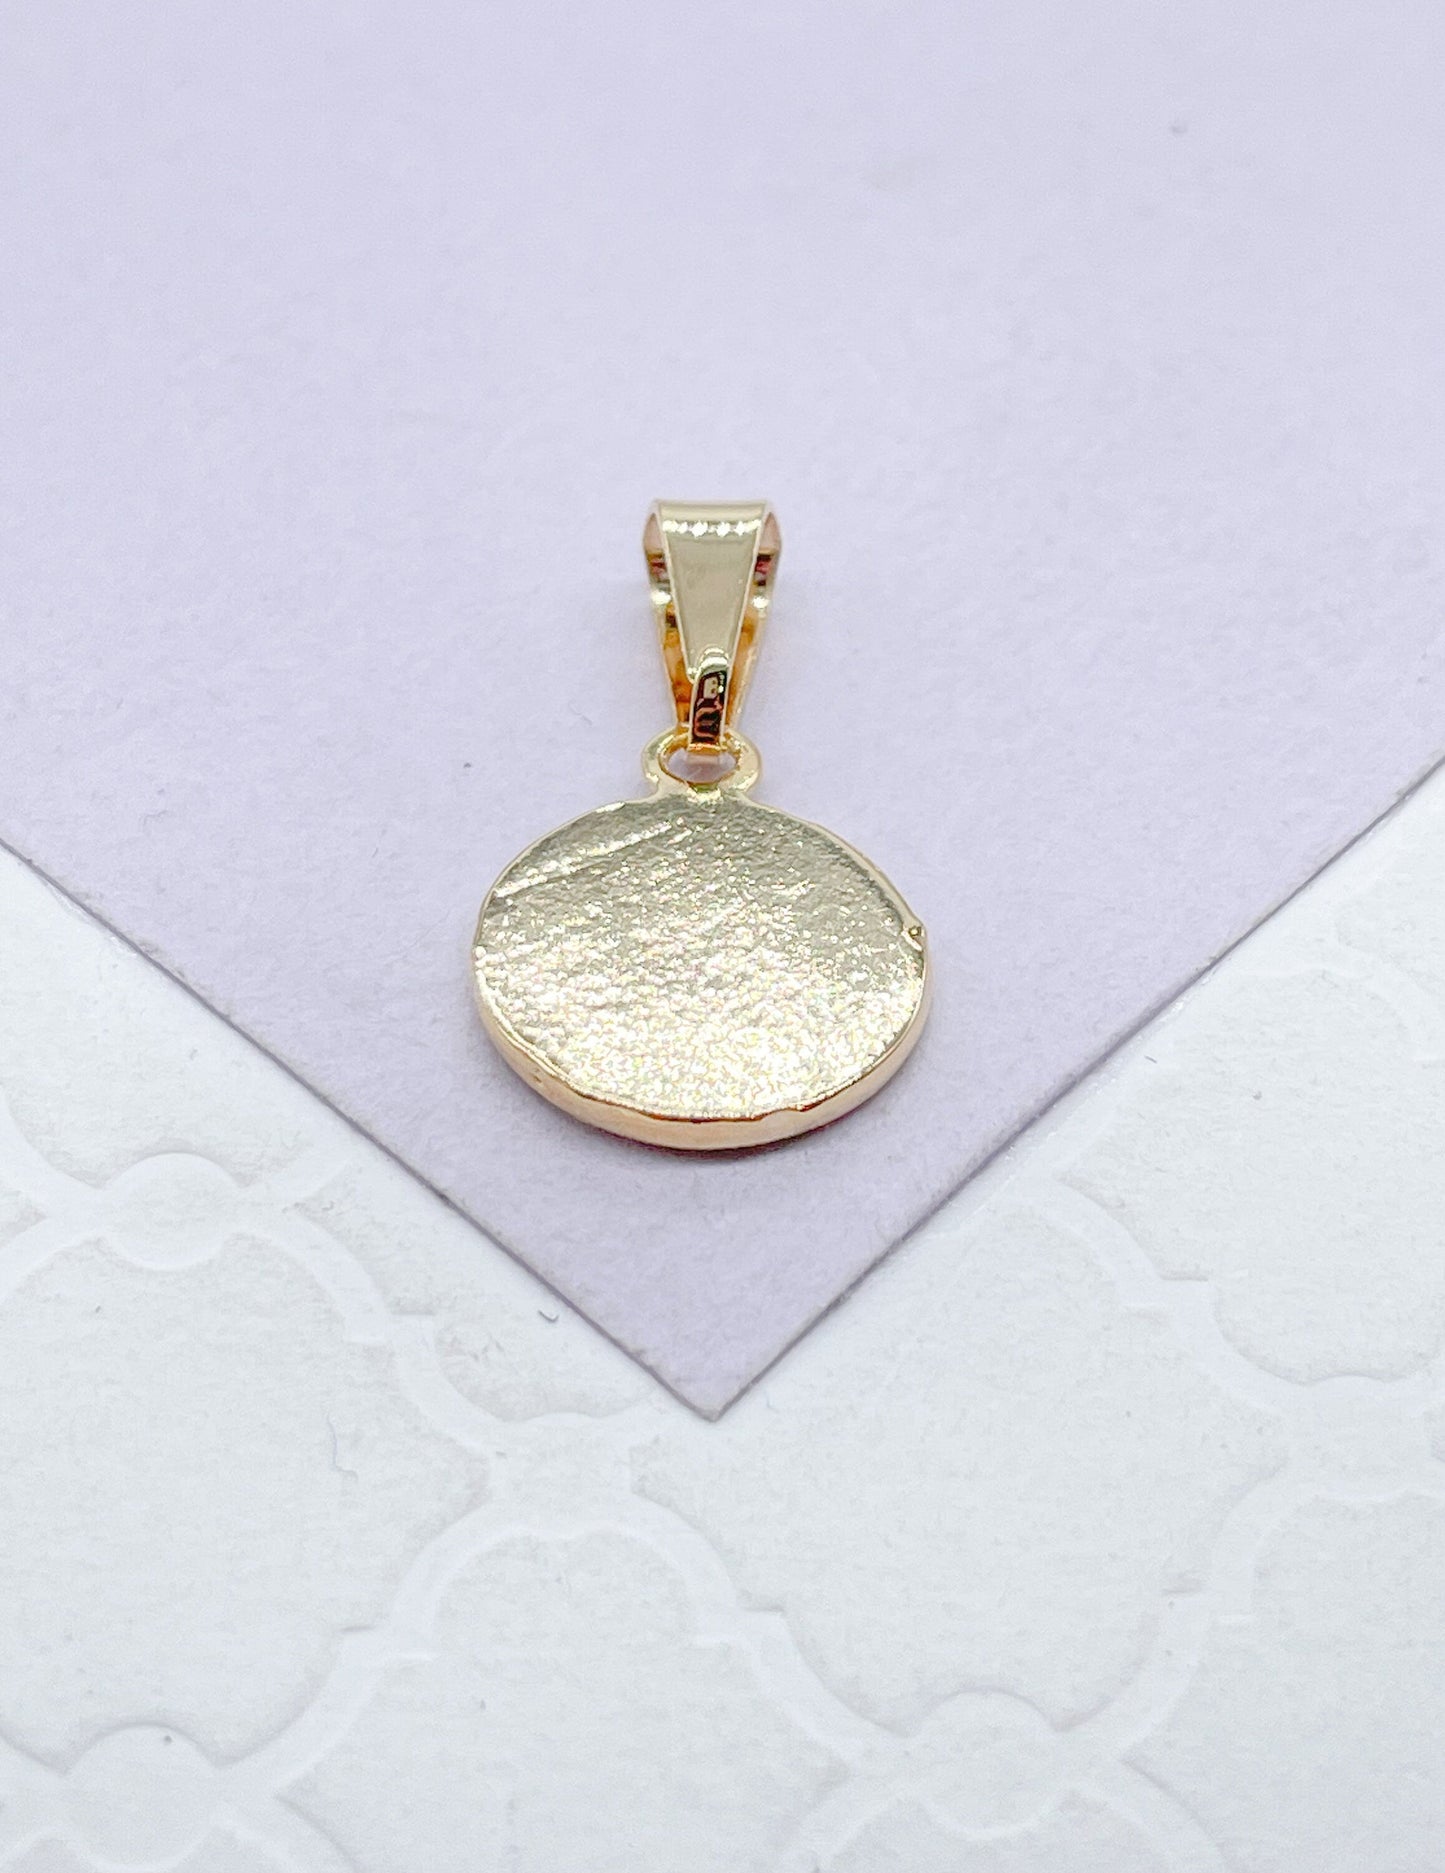 18k Gold Filled Mini Medallion Charm Pendant With engraved Angel